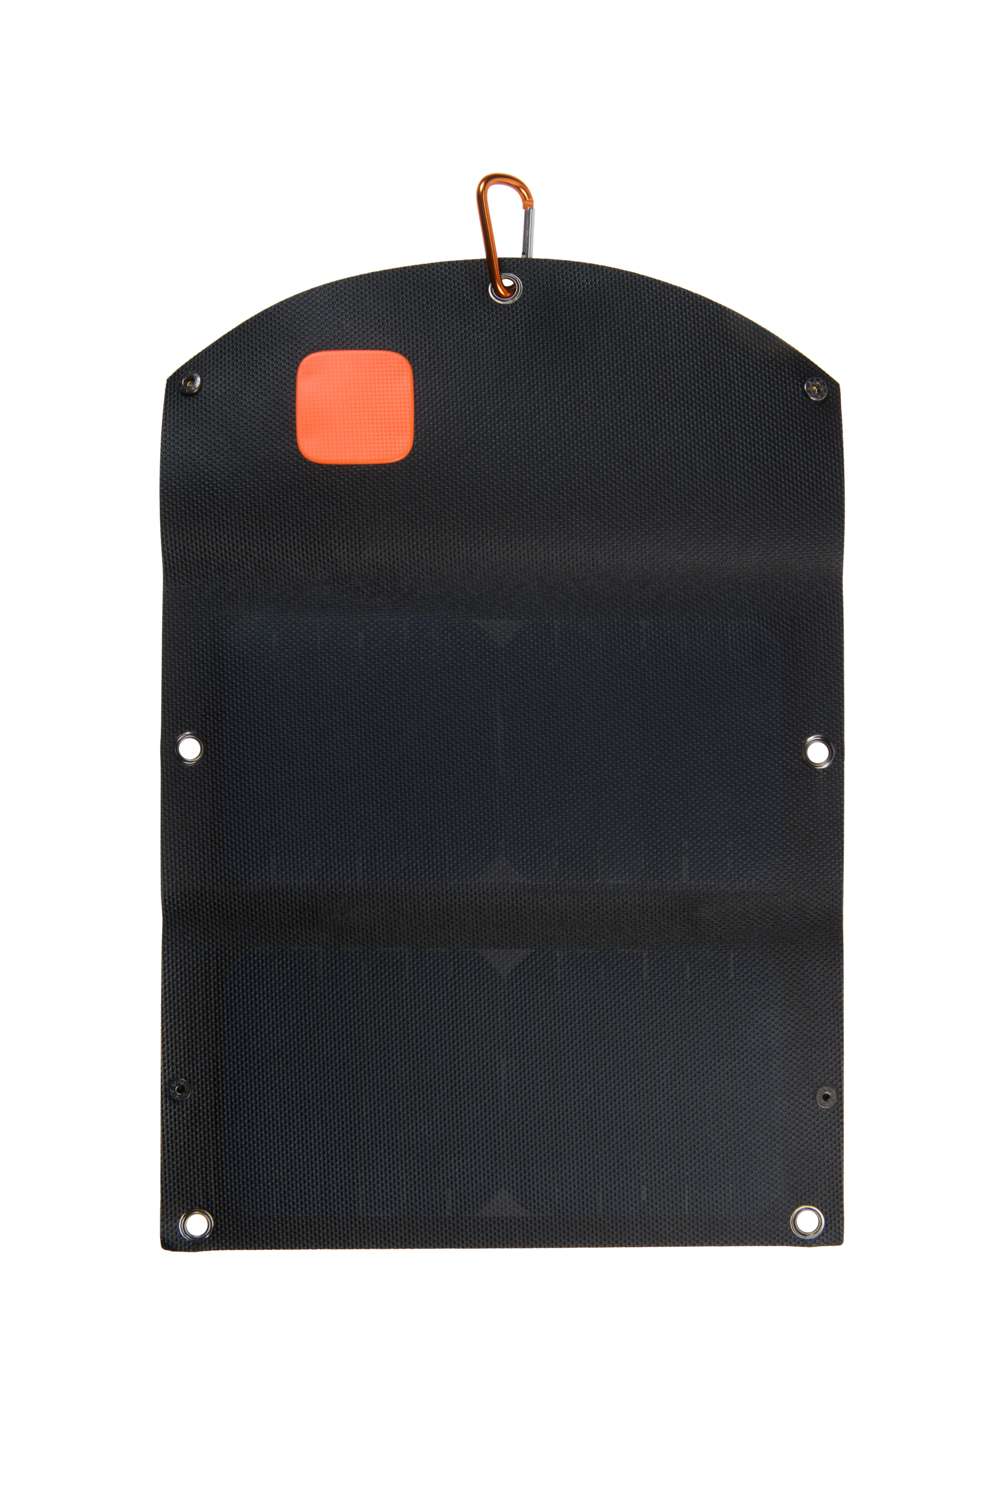 Xtorm AP250 - SolarBooster 14W Panel